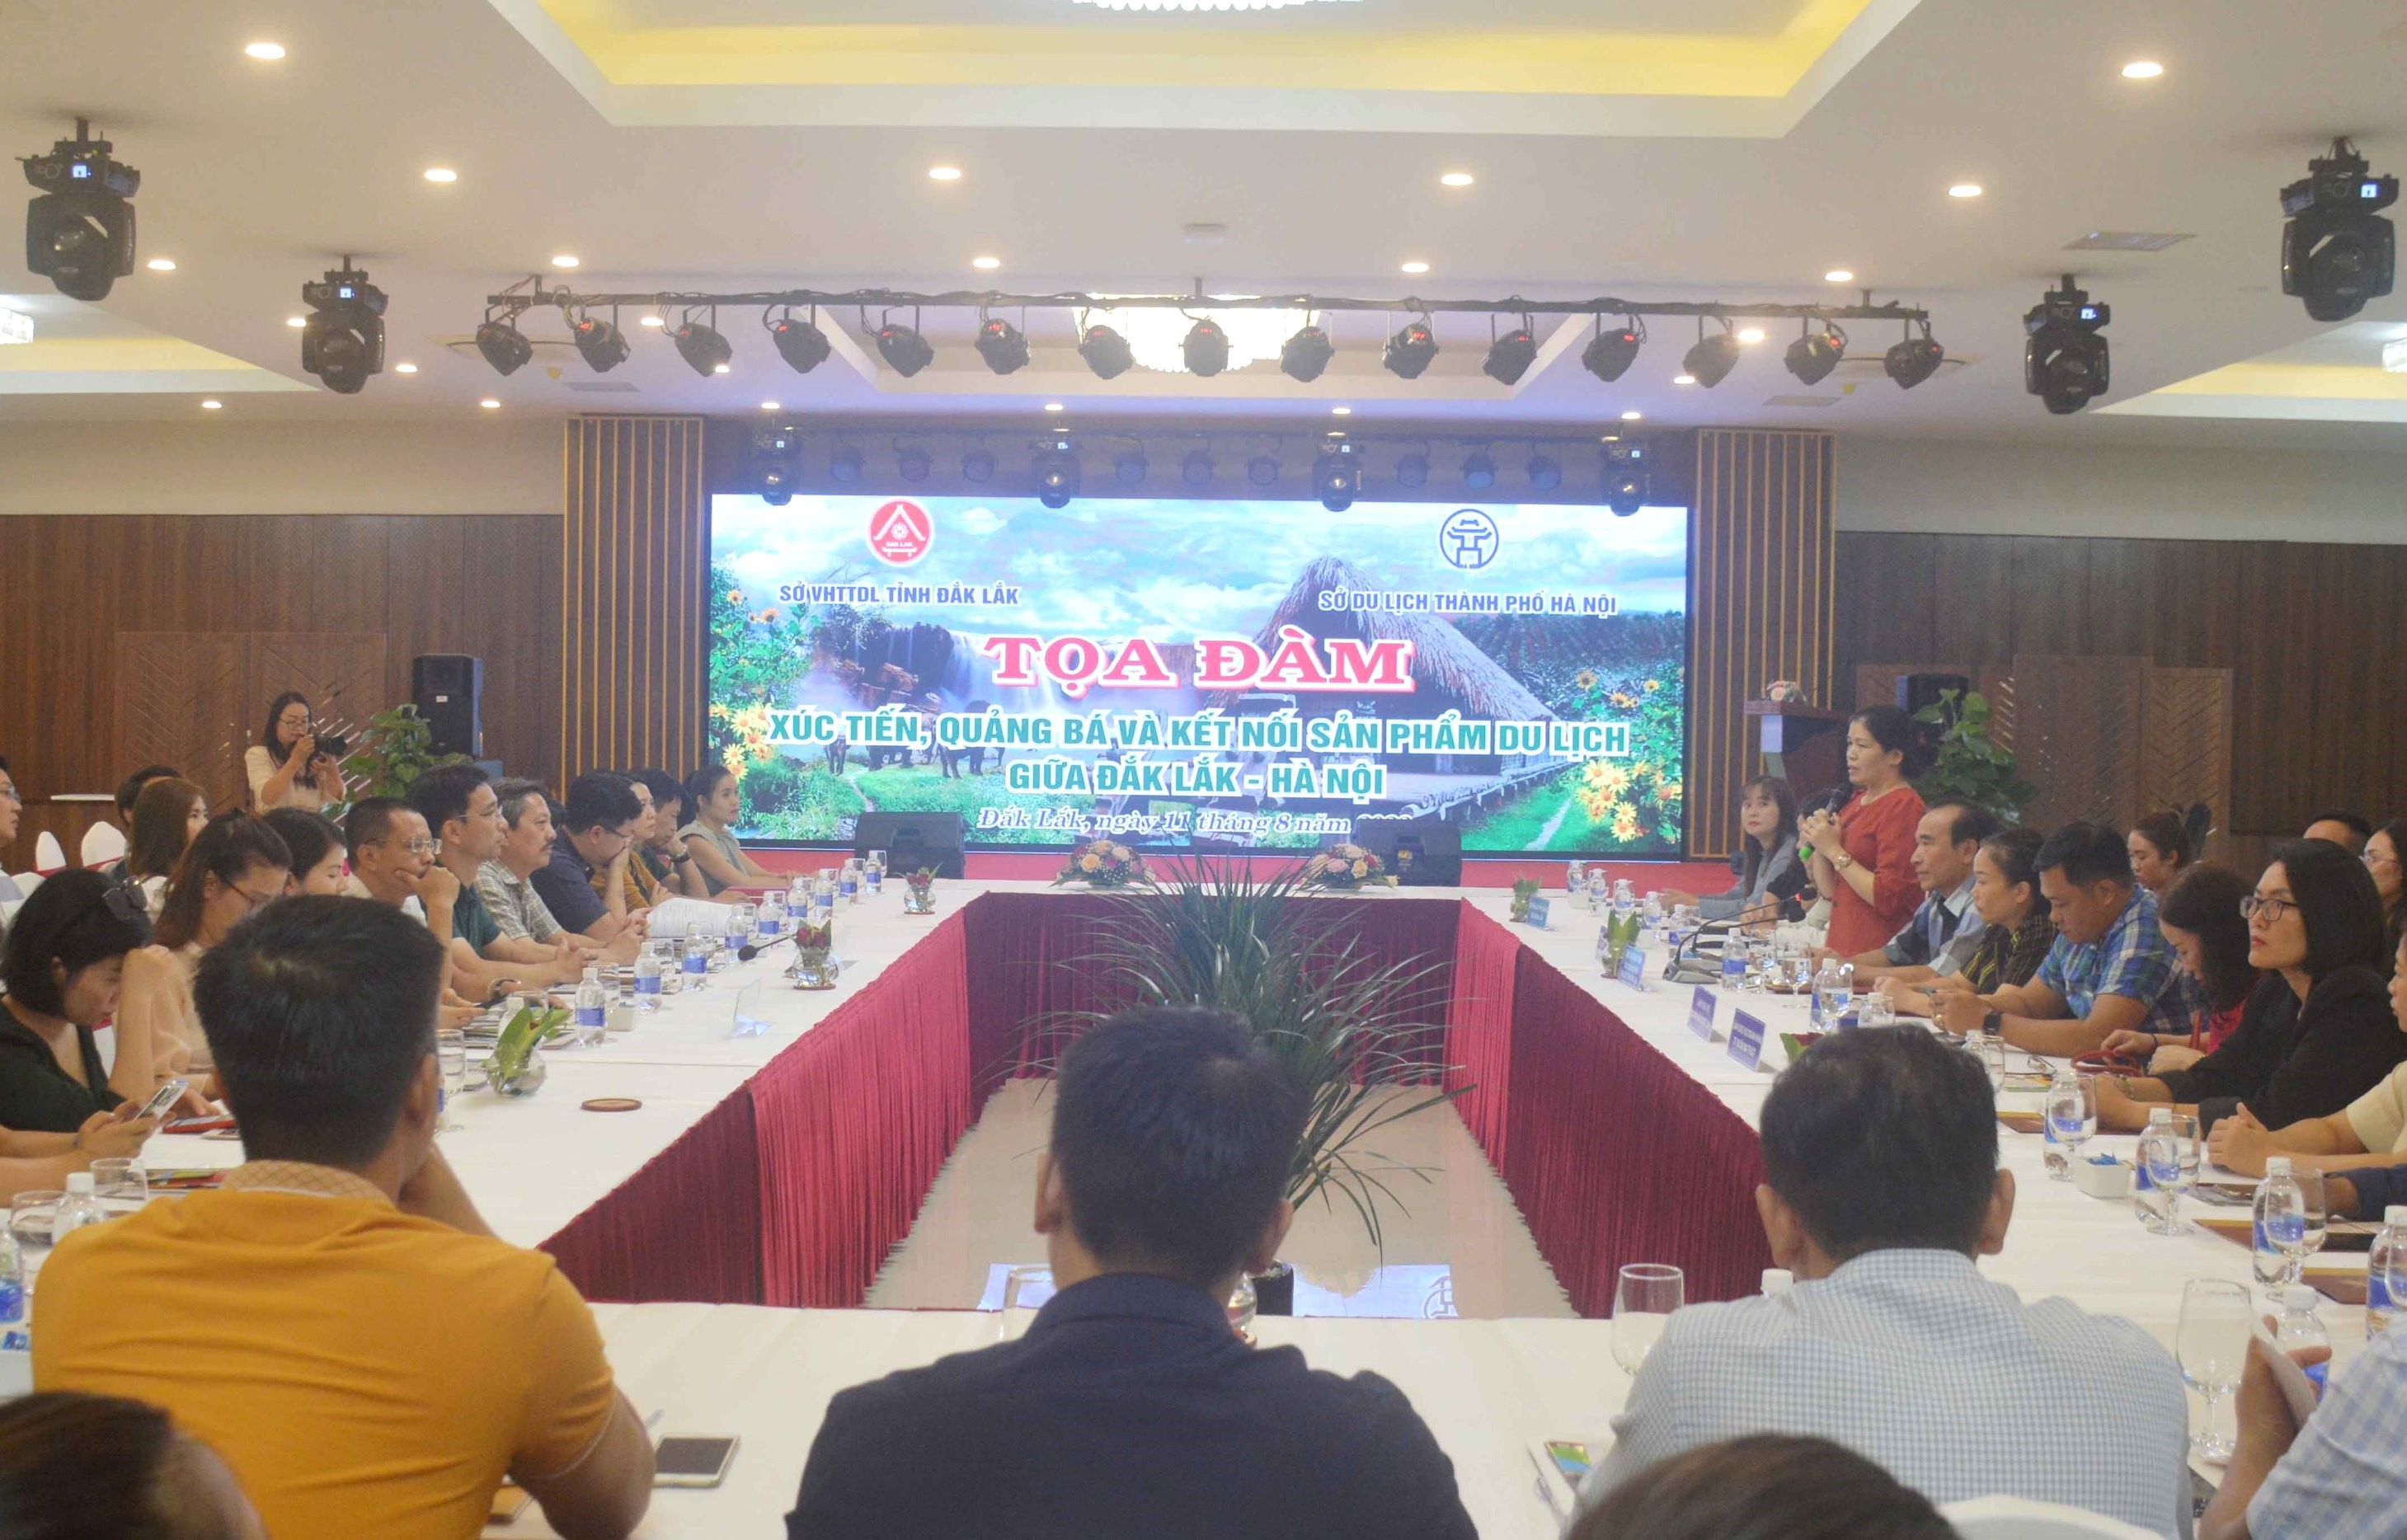 Strengthening promotion, advertising, and connection of tourism products between Dak Lak and Hanoi